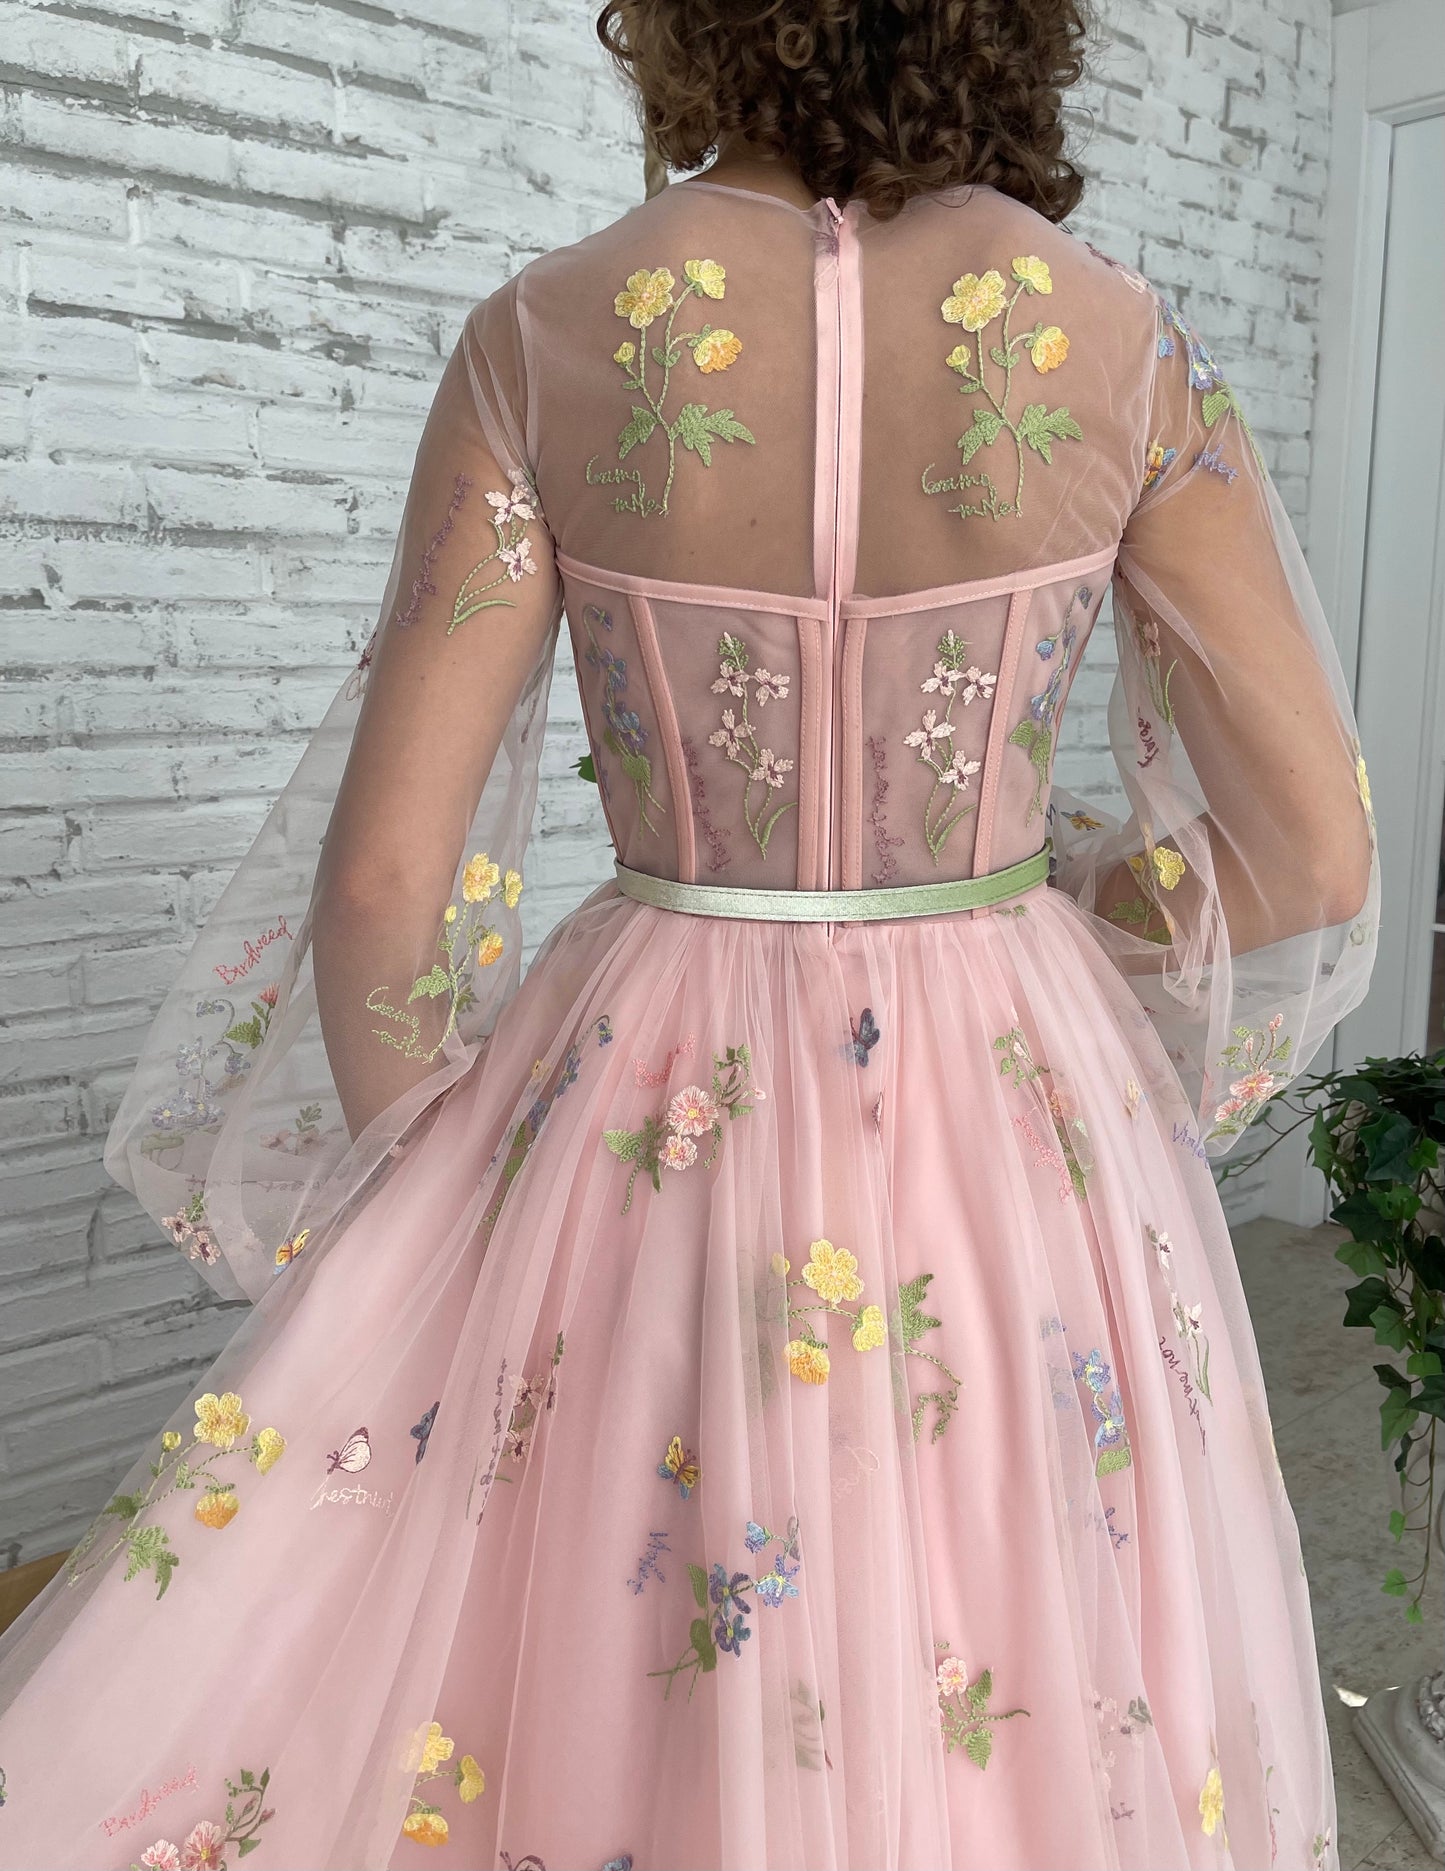 Pink A-Line dress with long sleeves, belt and flowers